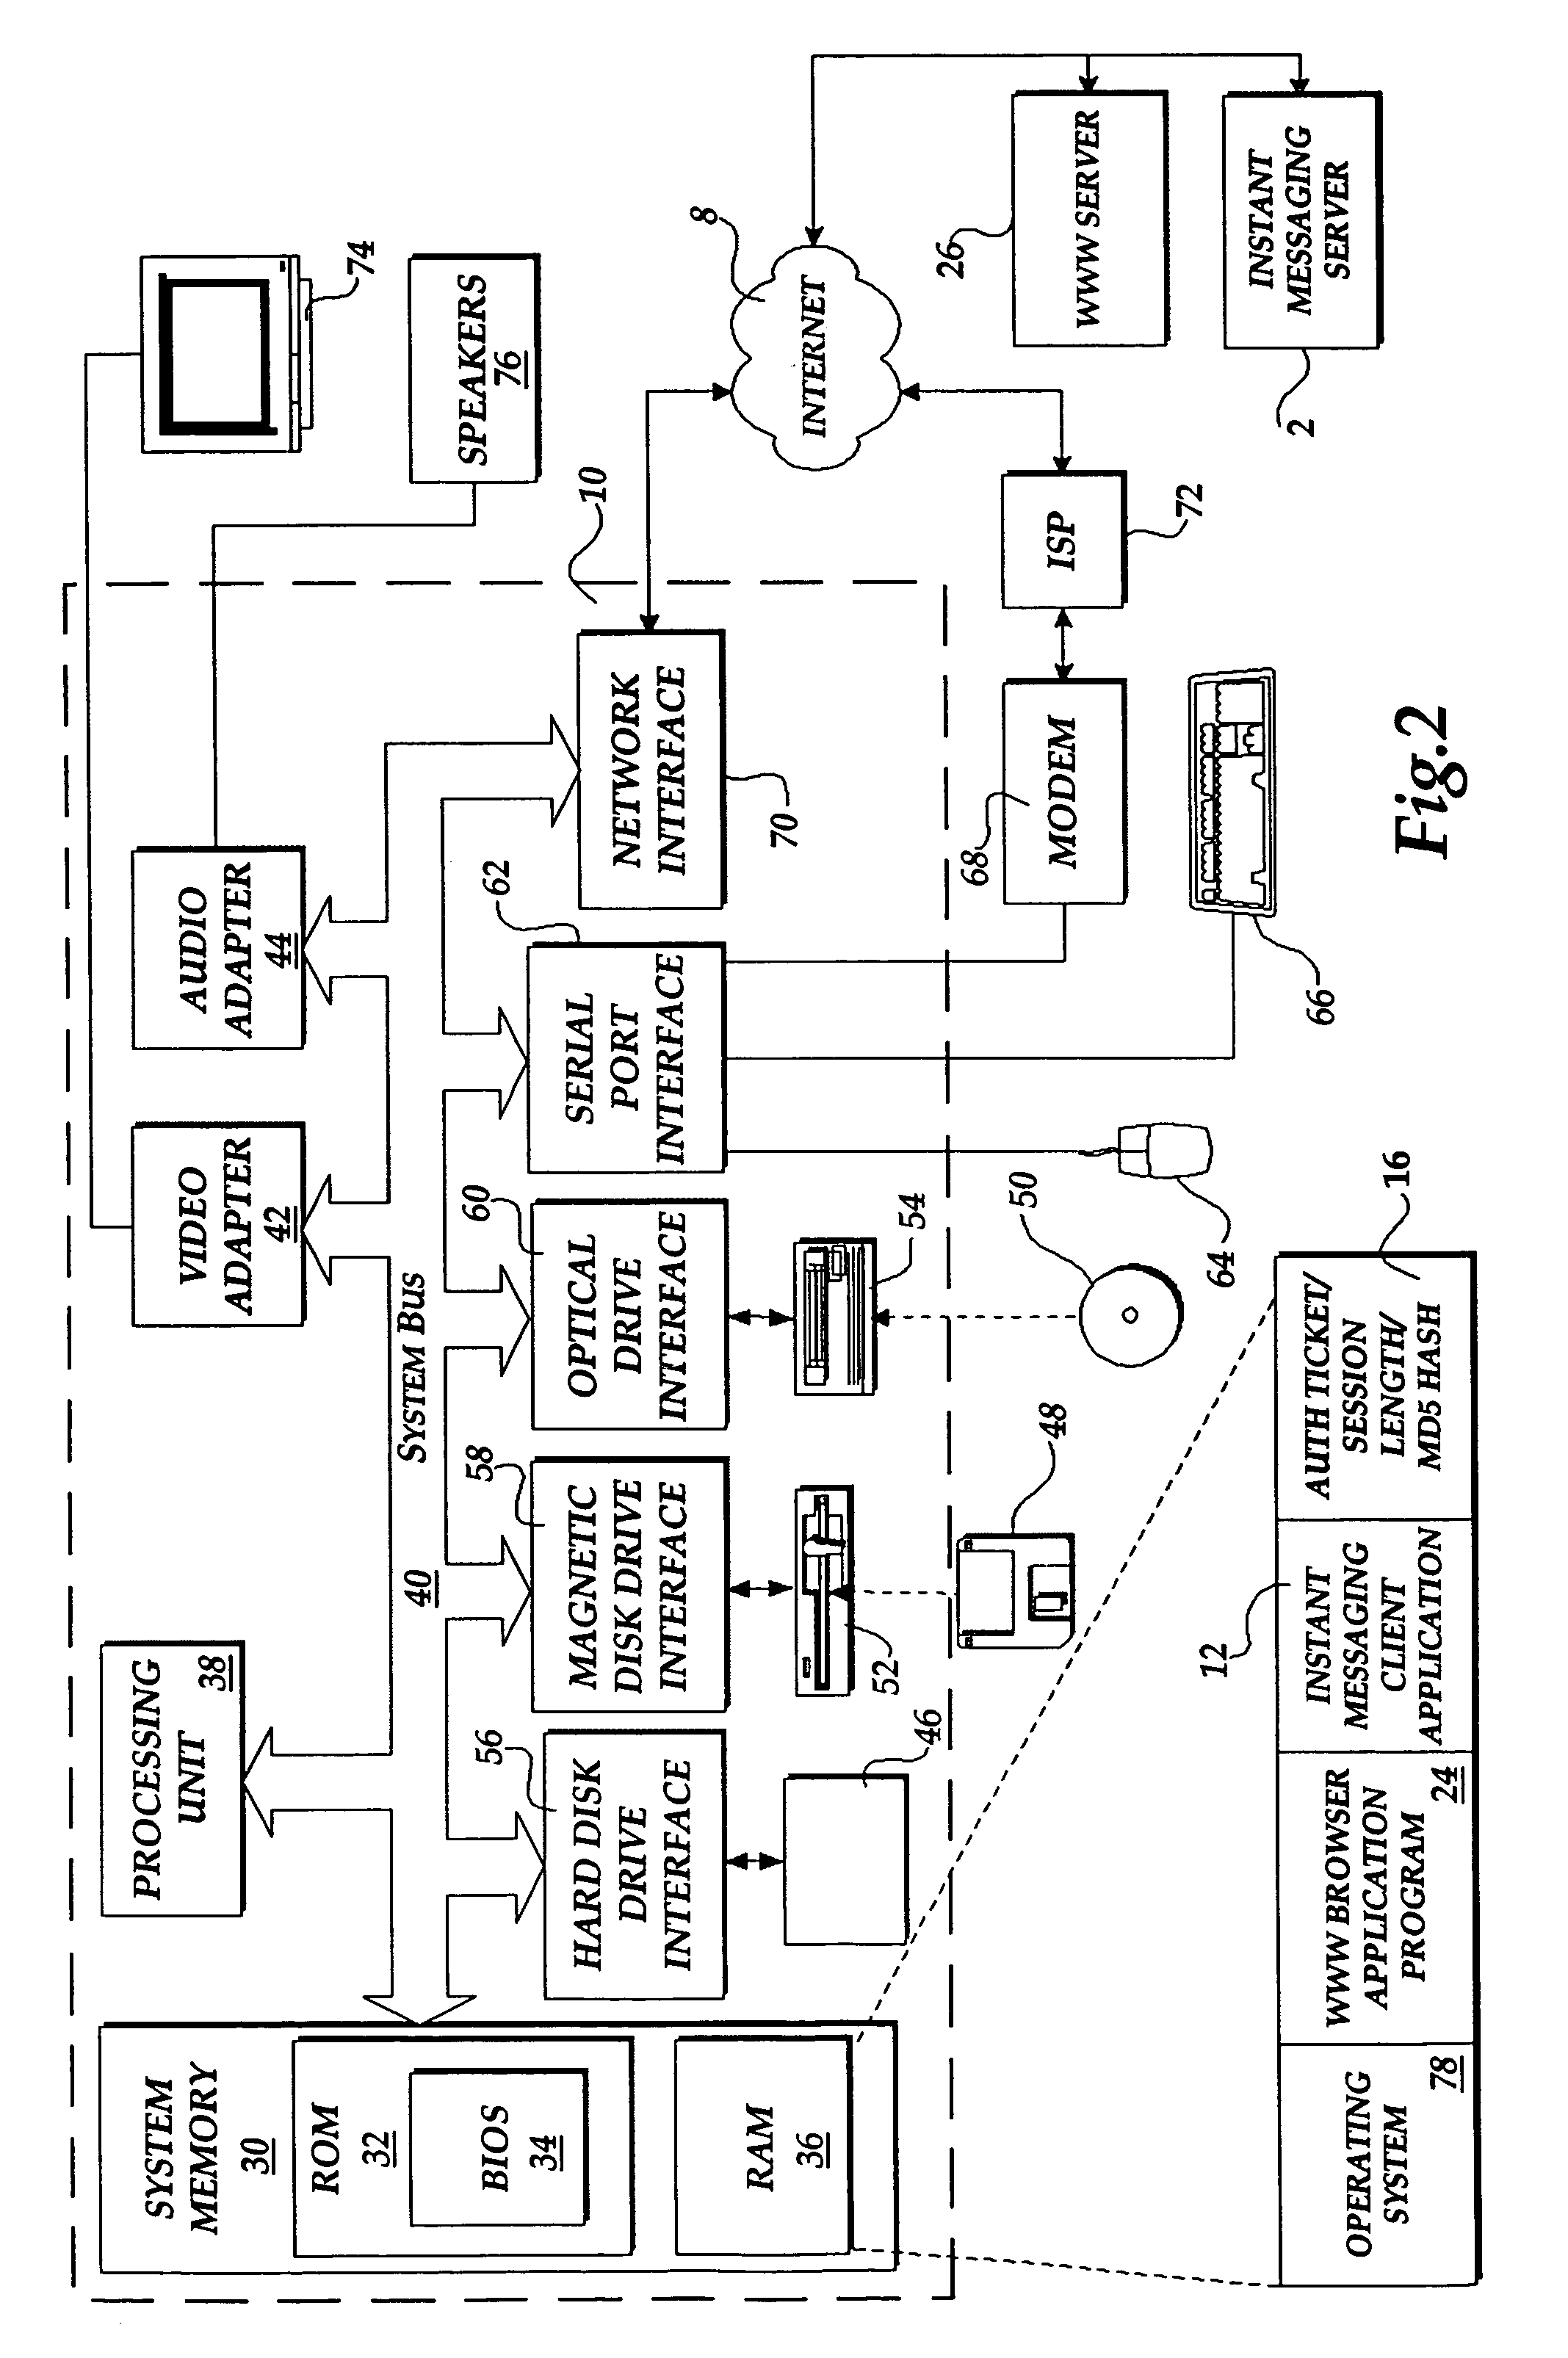 Method and system for authorizing a client computer to access a server computer